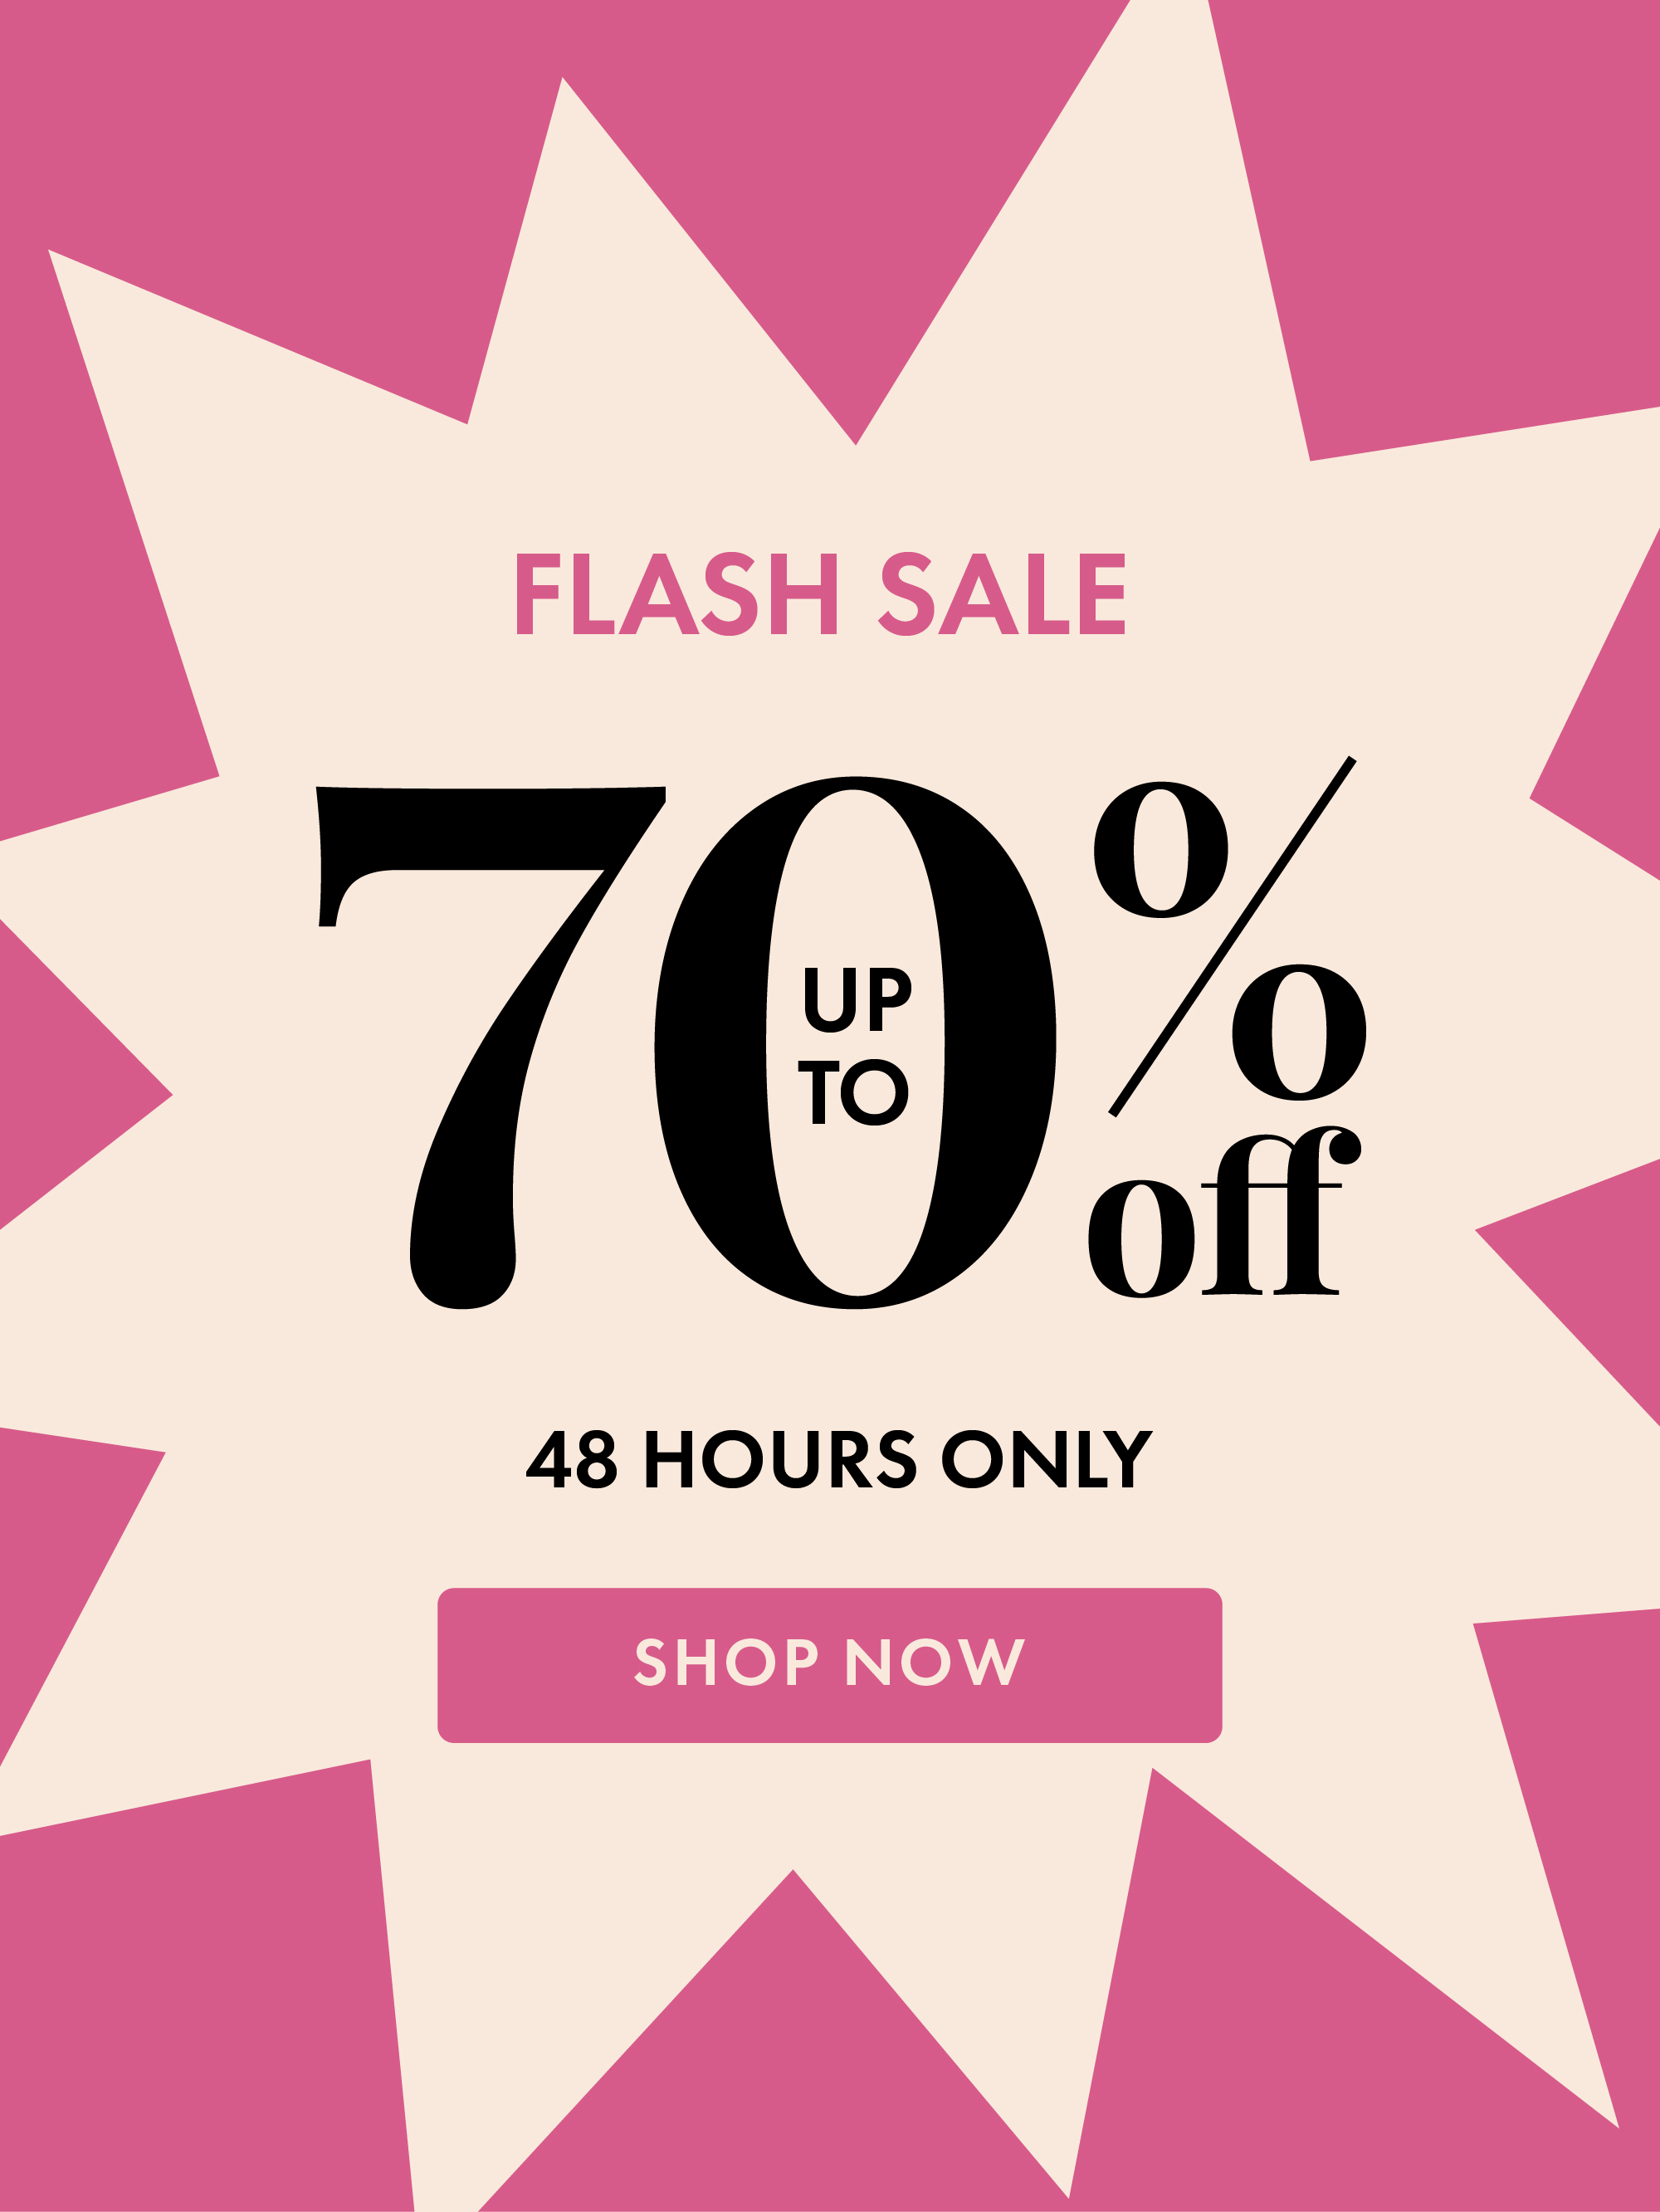 Flash Sale - up to 70% off | 48 hours only